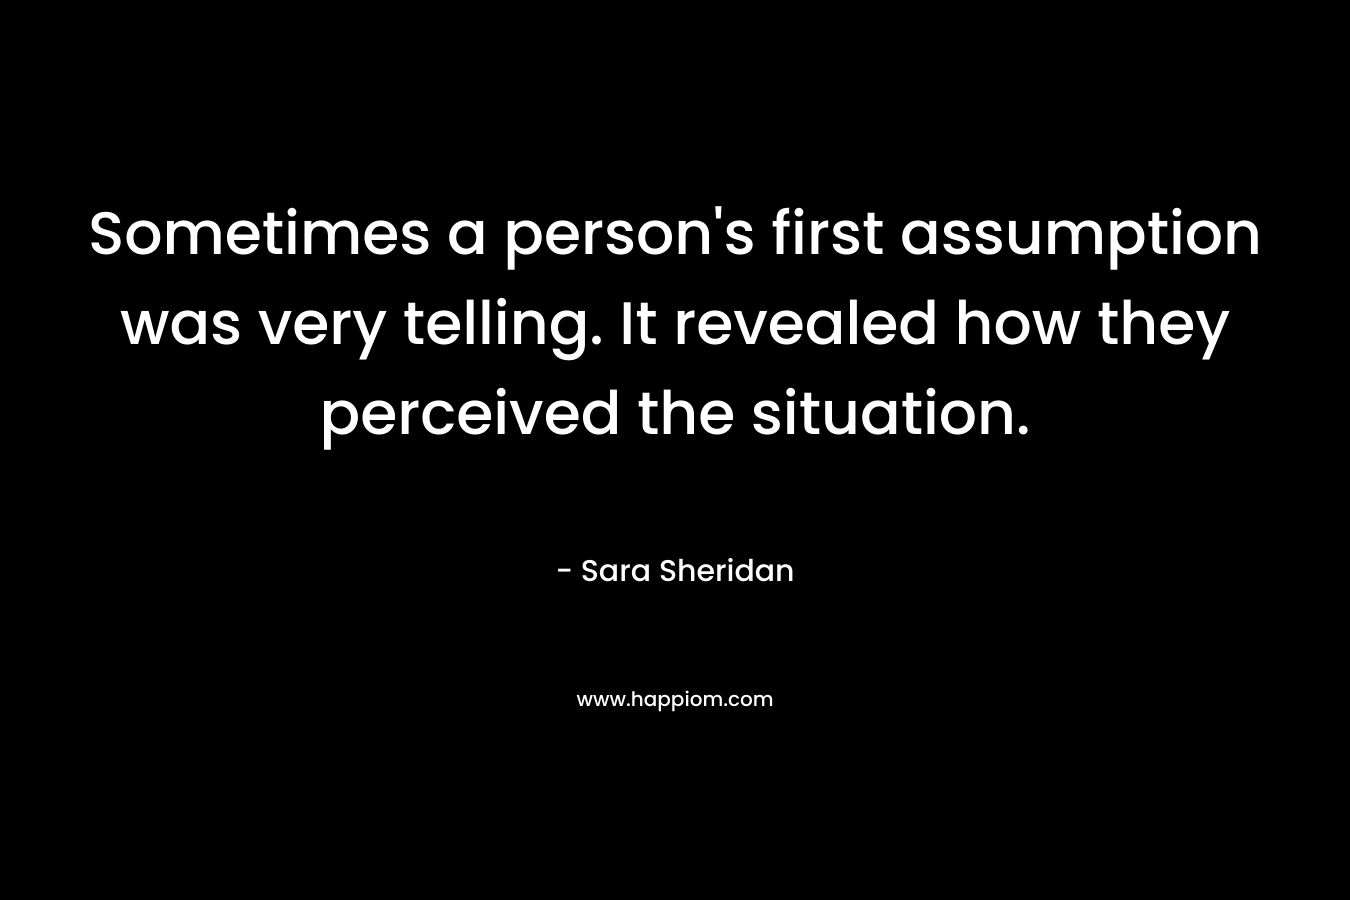 Sometimes a person’s first assumption was very telling. It revealed how they perceived the situation. – Sara Sheridan